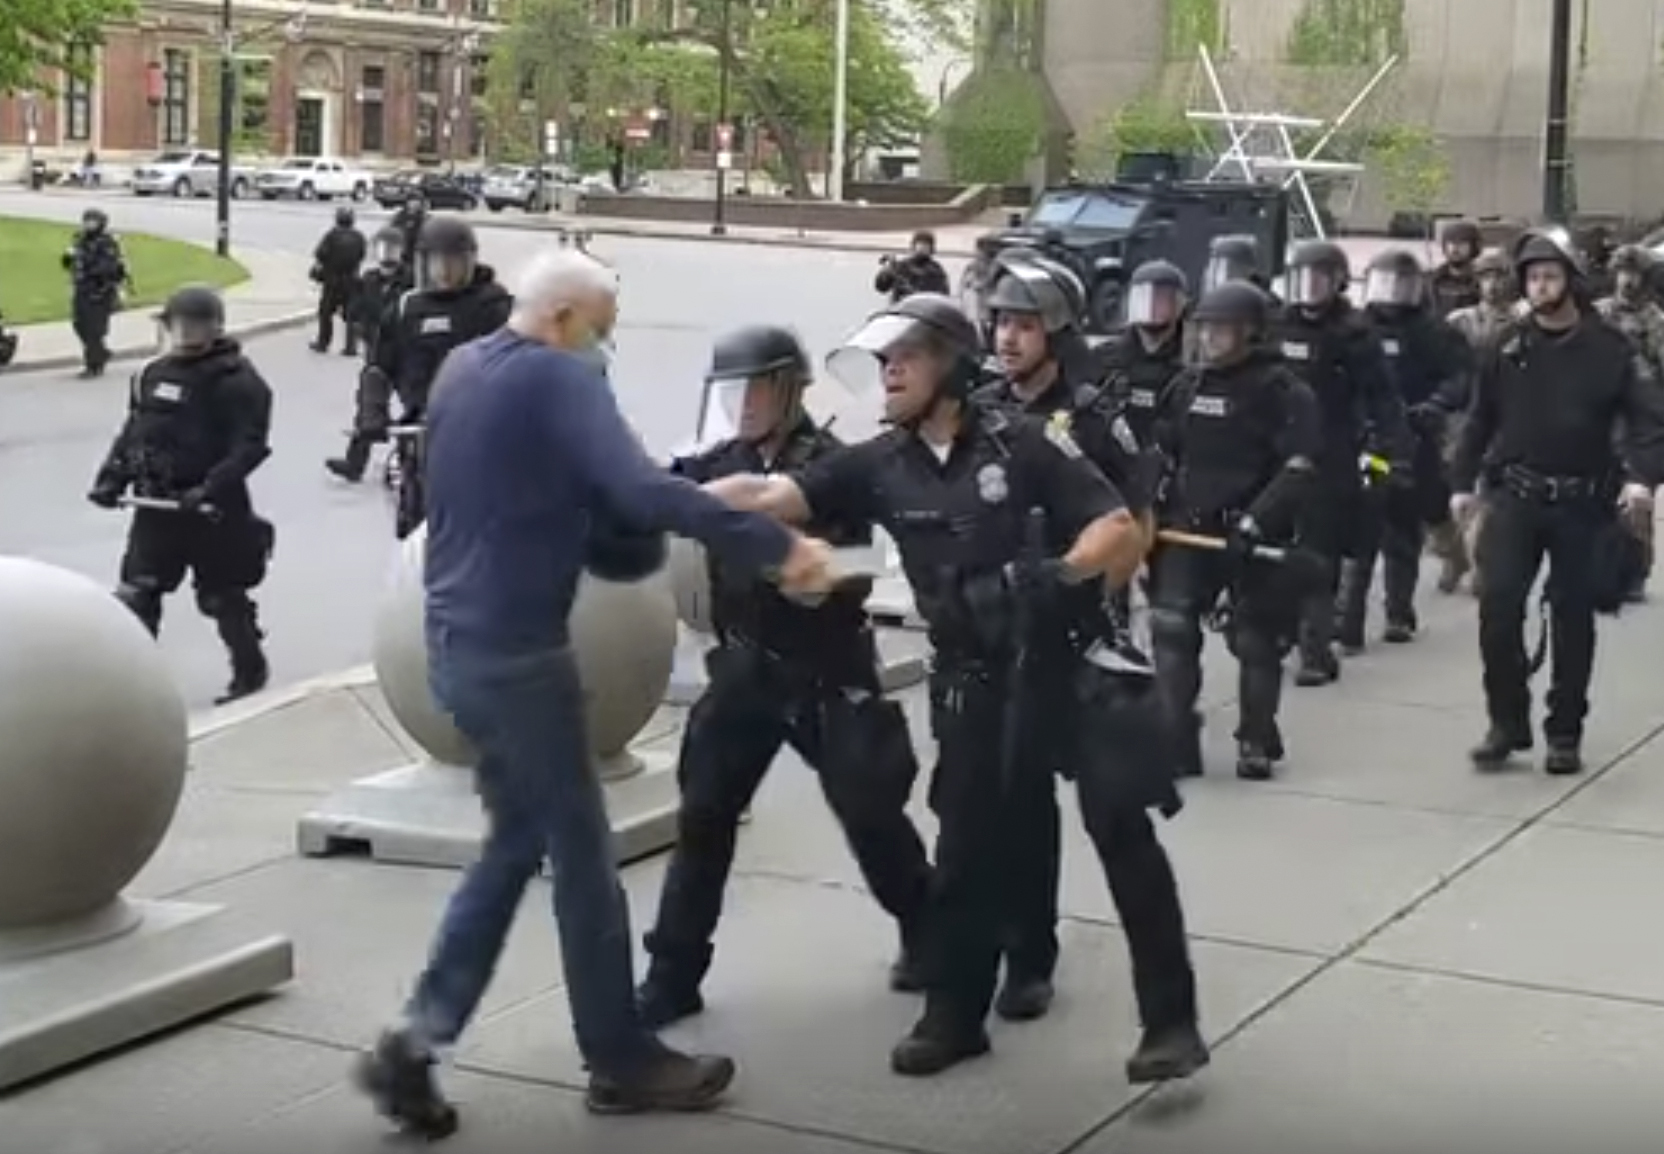 PHOTO: In this image from video provided by WBFO, a Buffalo police officer appears to shove a man who walked up to police Thursday, June 4, 2020, in Buffalo, N.Y.